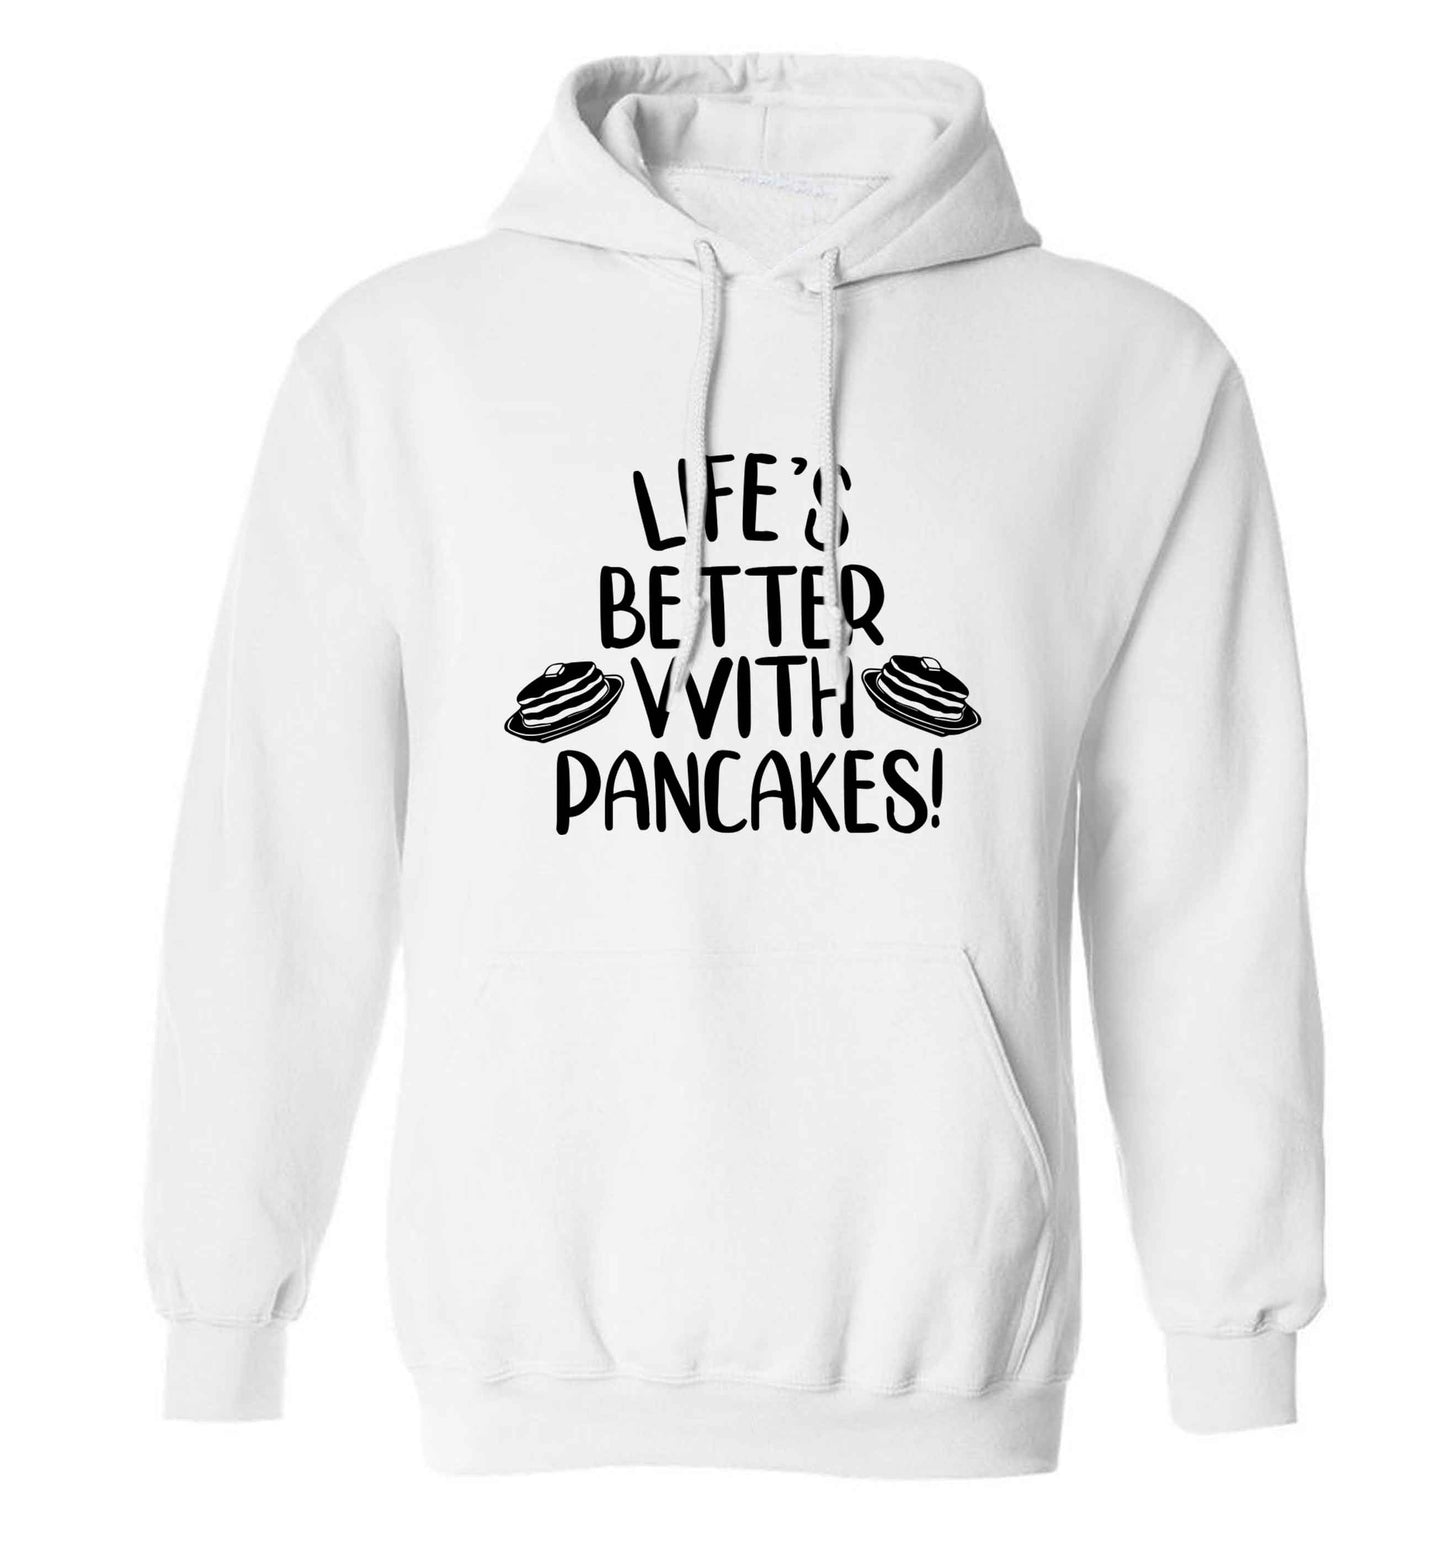 Life's better with pancakes adults unisex white hoodie 2XL